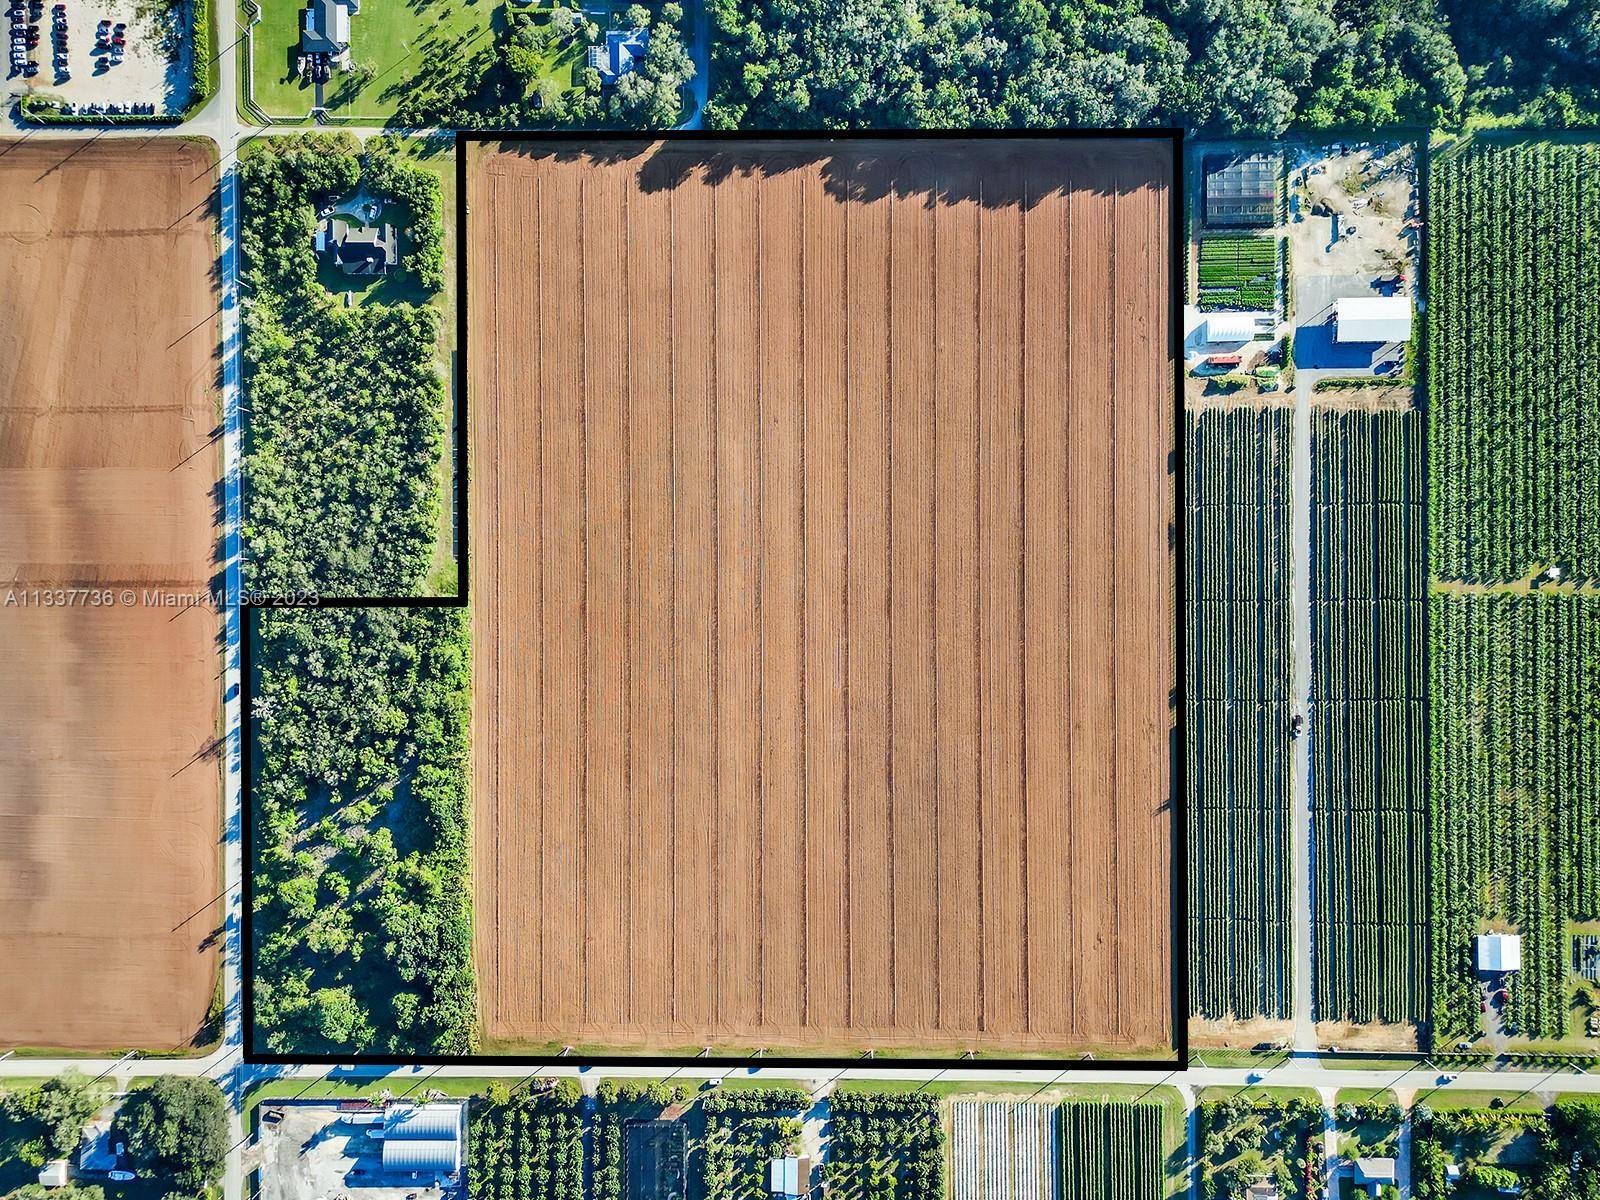 35 acres in Prime Redland Location holds endless possibilities !